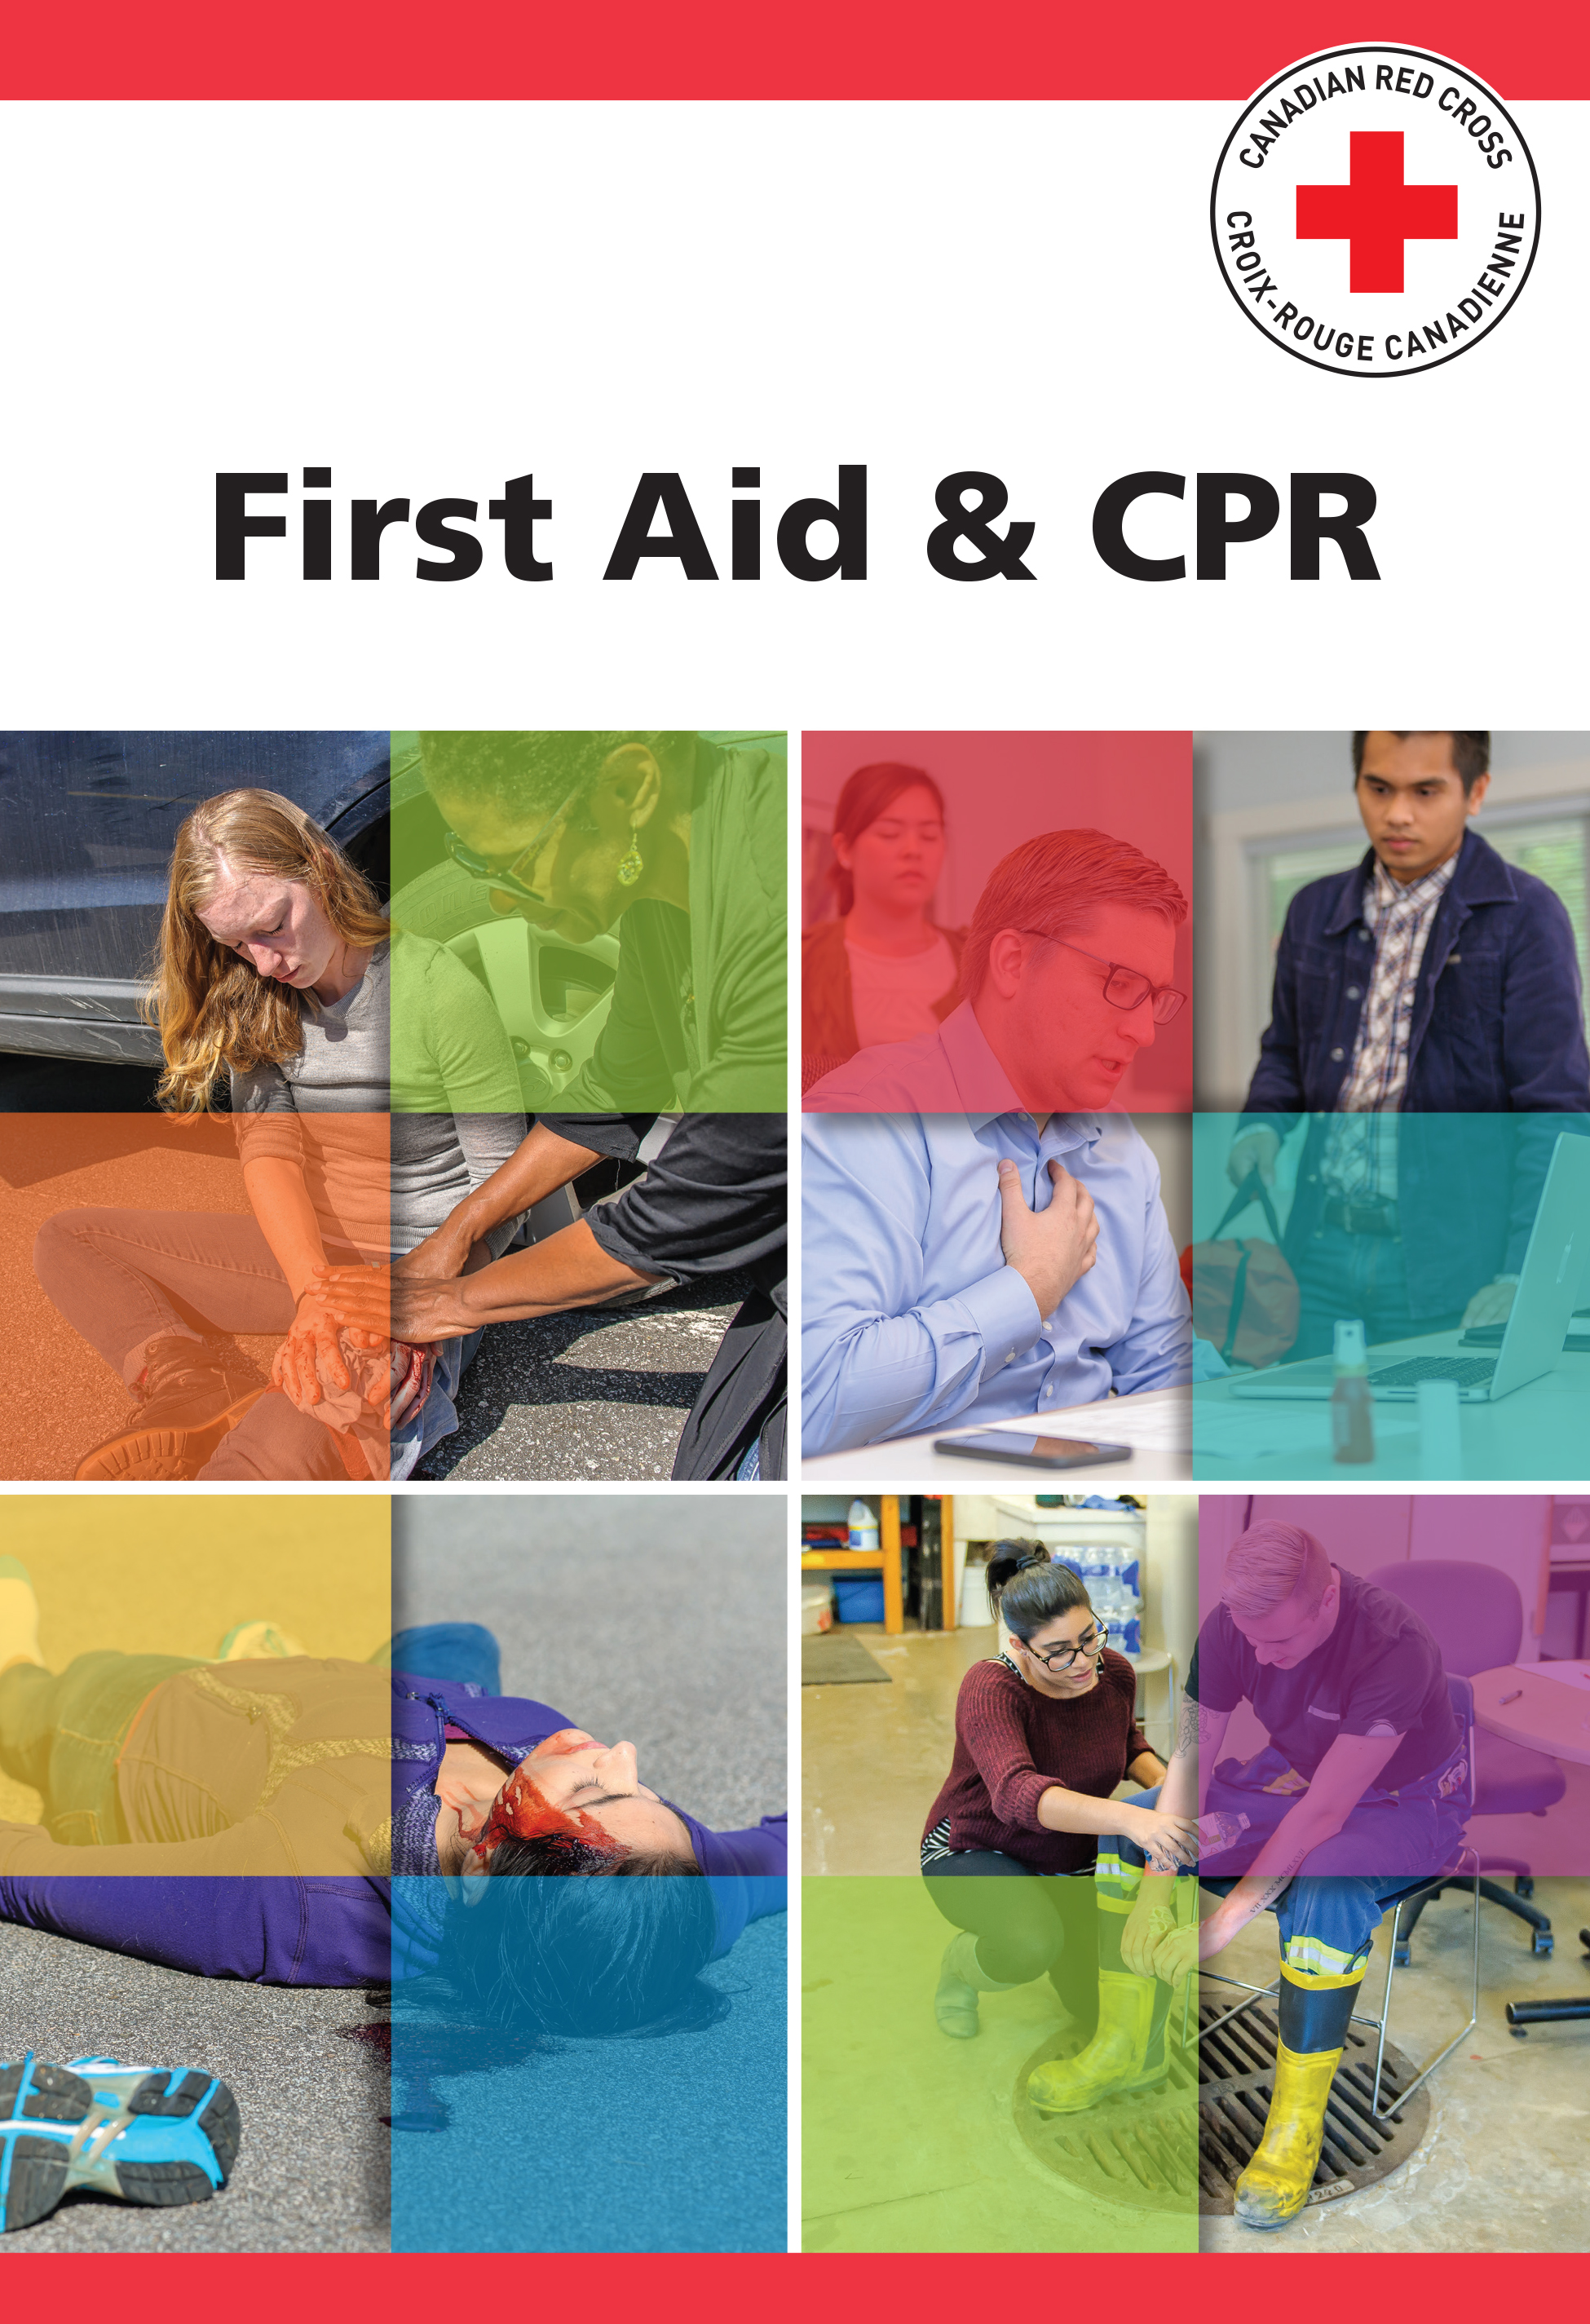 First Aid Course Materials for Marine Basic First Aid Course - CPR (Blended) in Victoria-TILLICUM